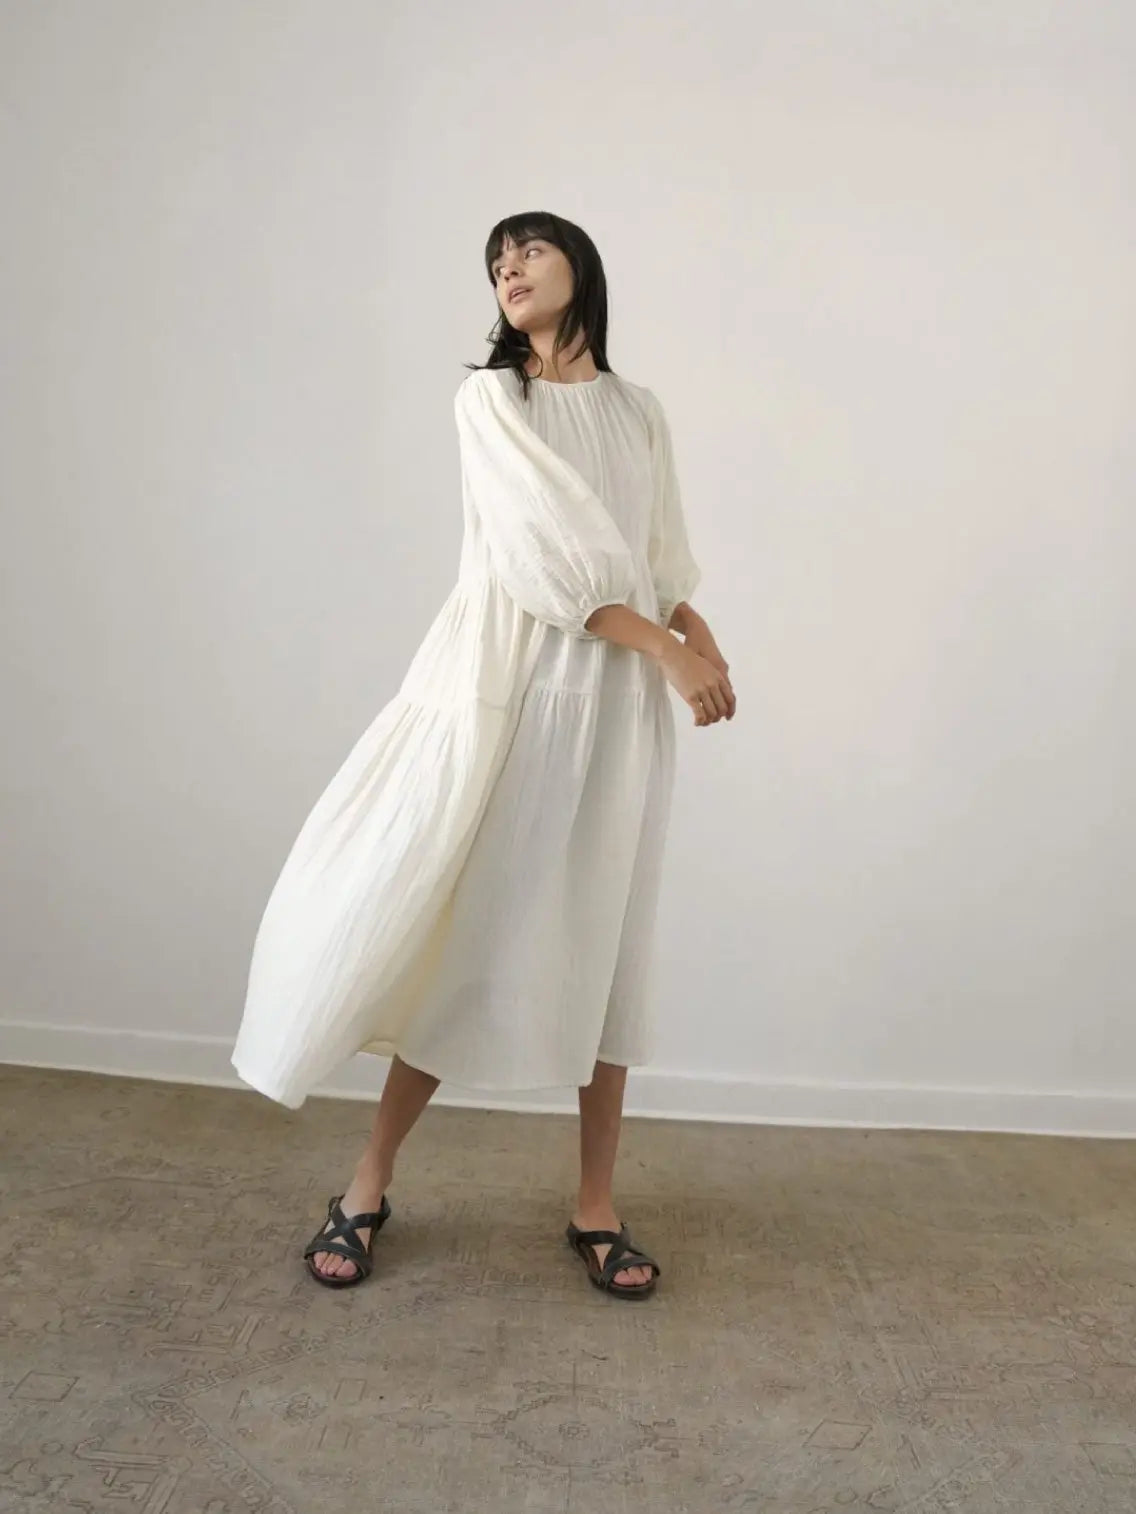 A person with long dark hair is standing in a minimalist room with white walls in Barcelona. They are wearing the Nella Dress by Zii Ropa with black strappy sandals. Their expression is neutral as they look directly at the camera.